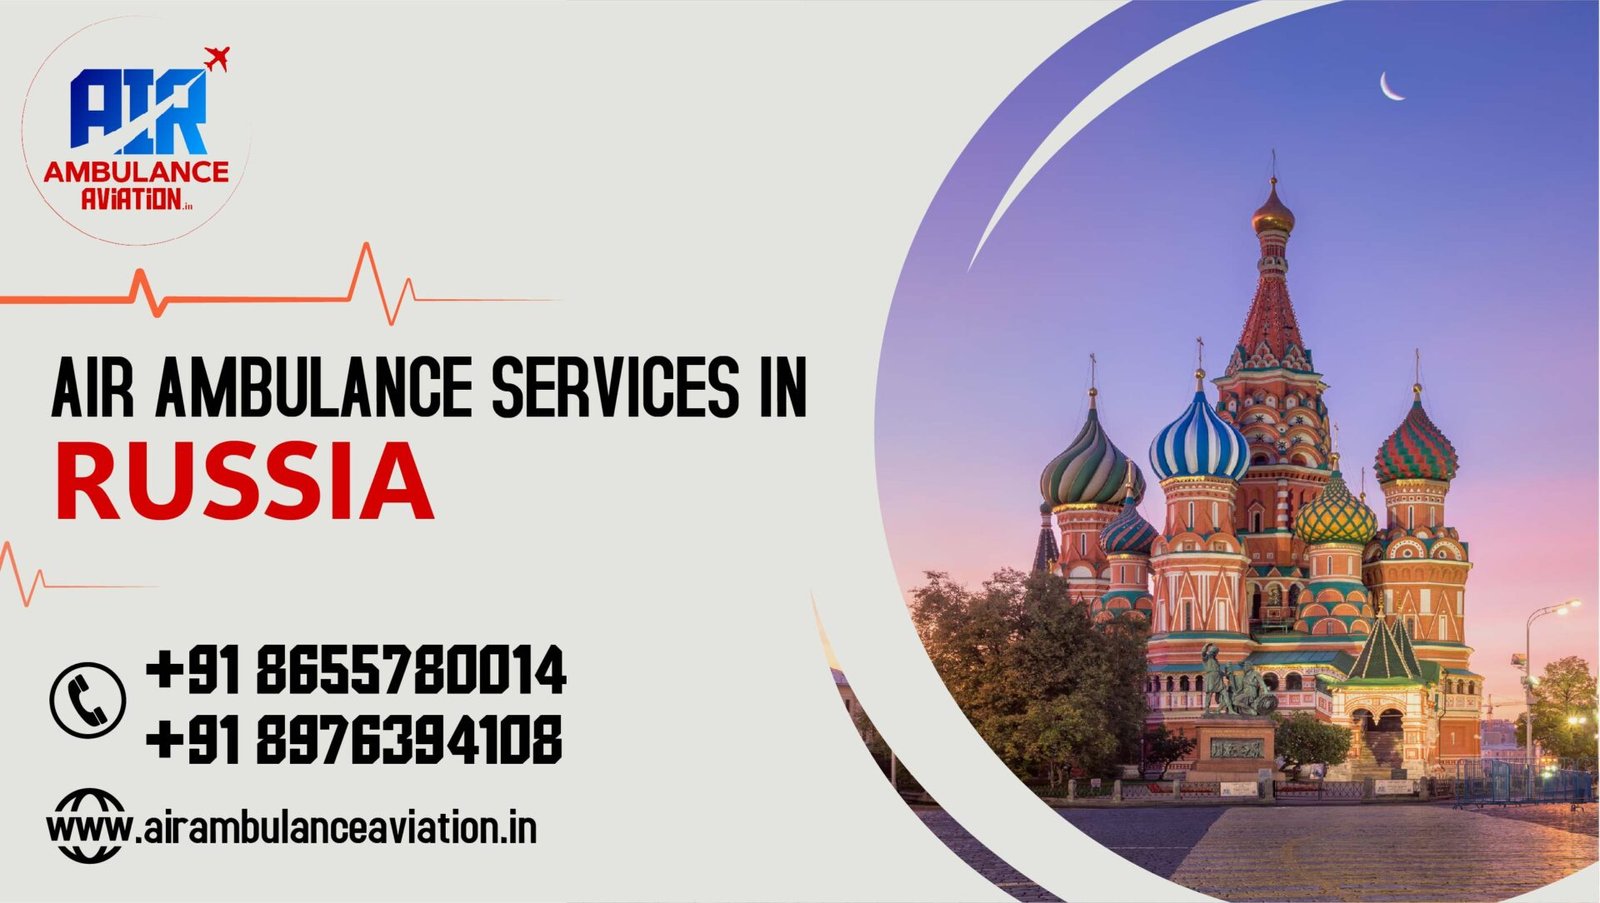 Air Ambulance Services in Russia